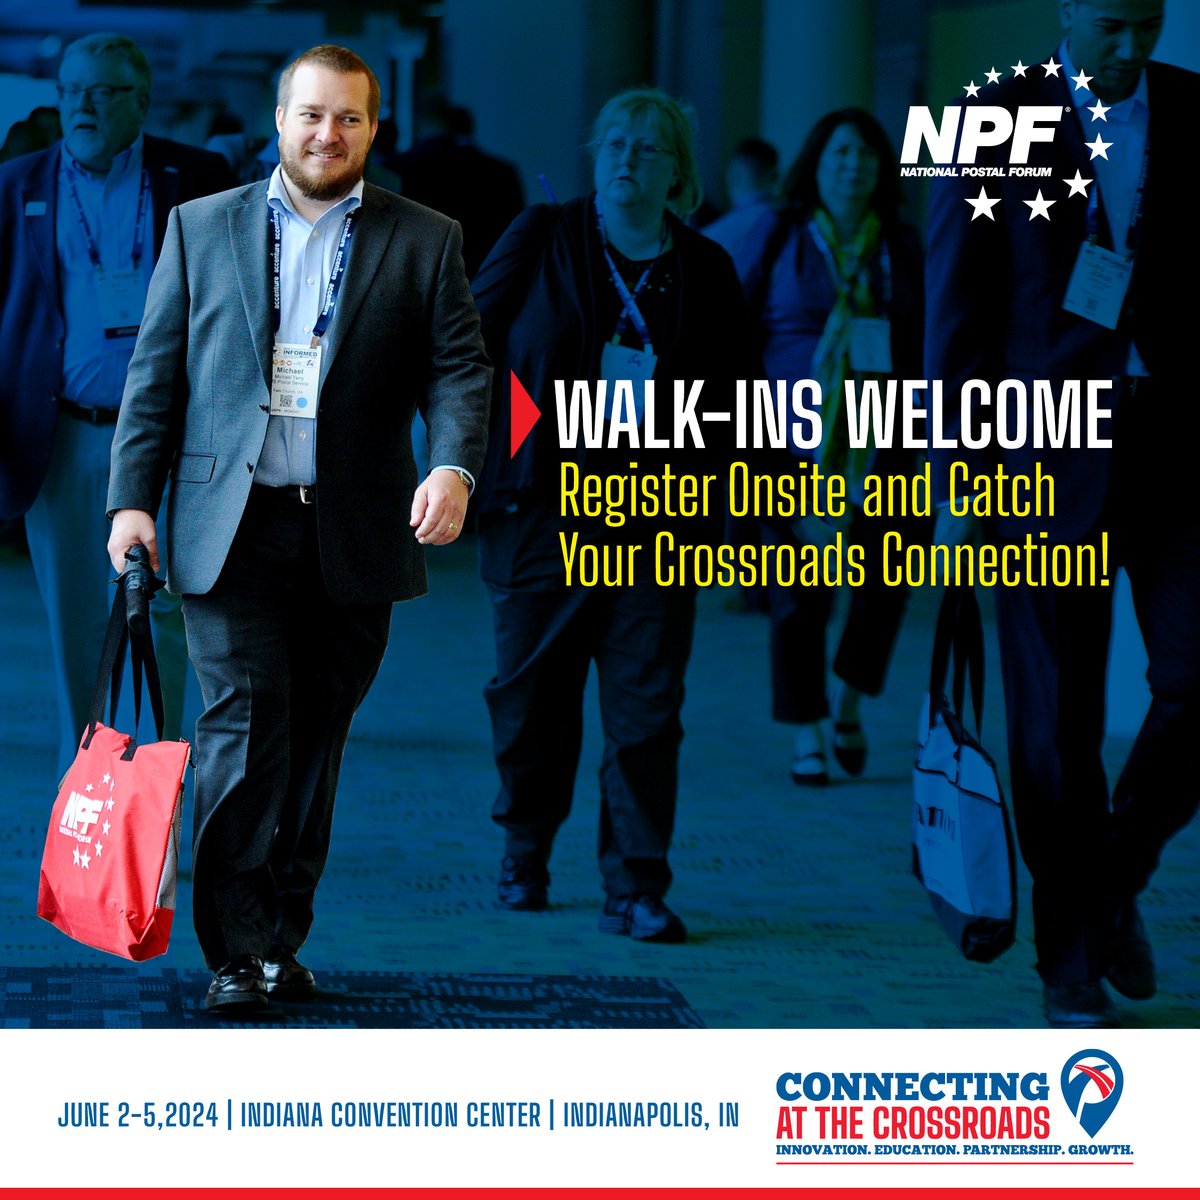 Your chance to attend #NPF2024 isn’t over! Walk-in registrations are welcome beginning 6/1. Don’t miss out on the opportunity to network, learn from #USPS leaders & discover the latest industry innovations. bit.ly/4edBnKL. #DeliveringForAmerica #ConnectingAtTheCrossroads